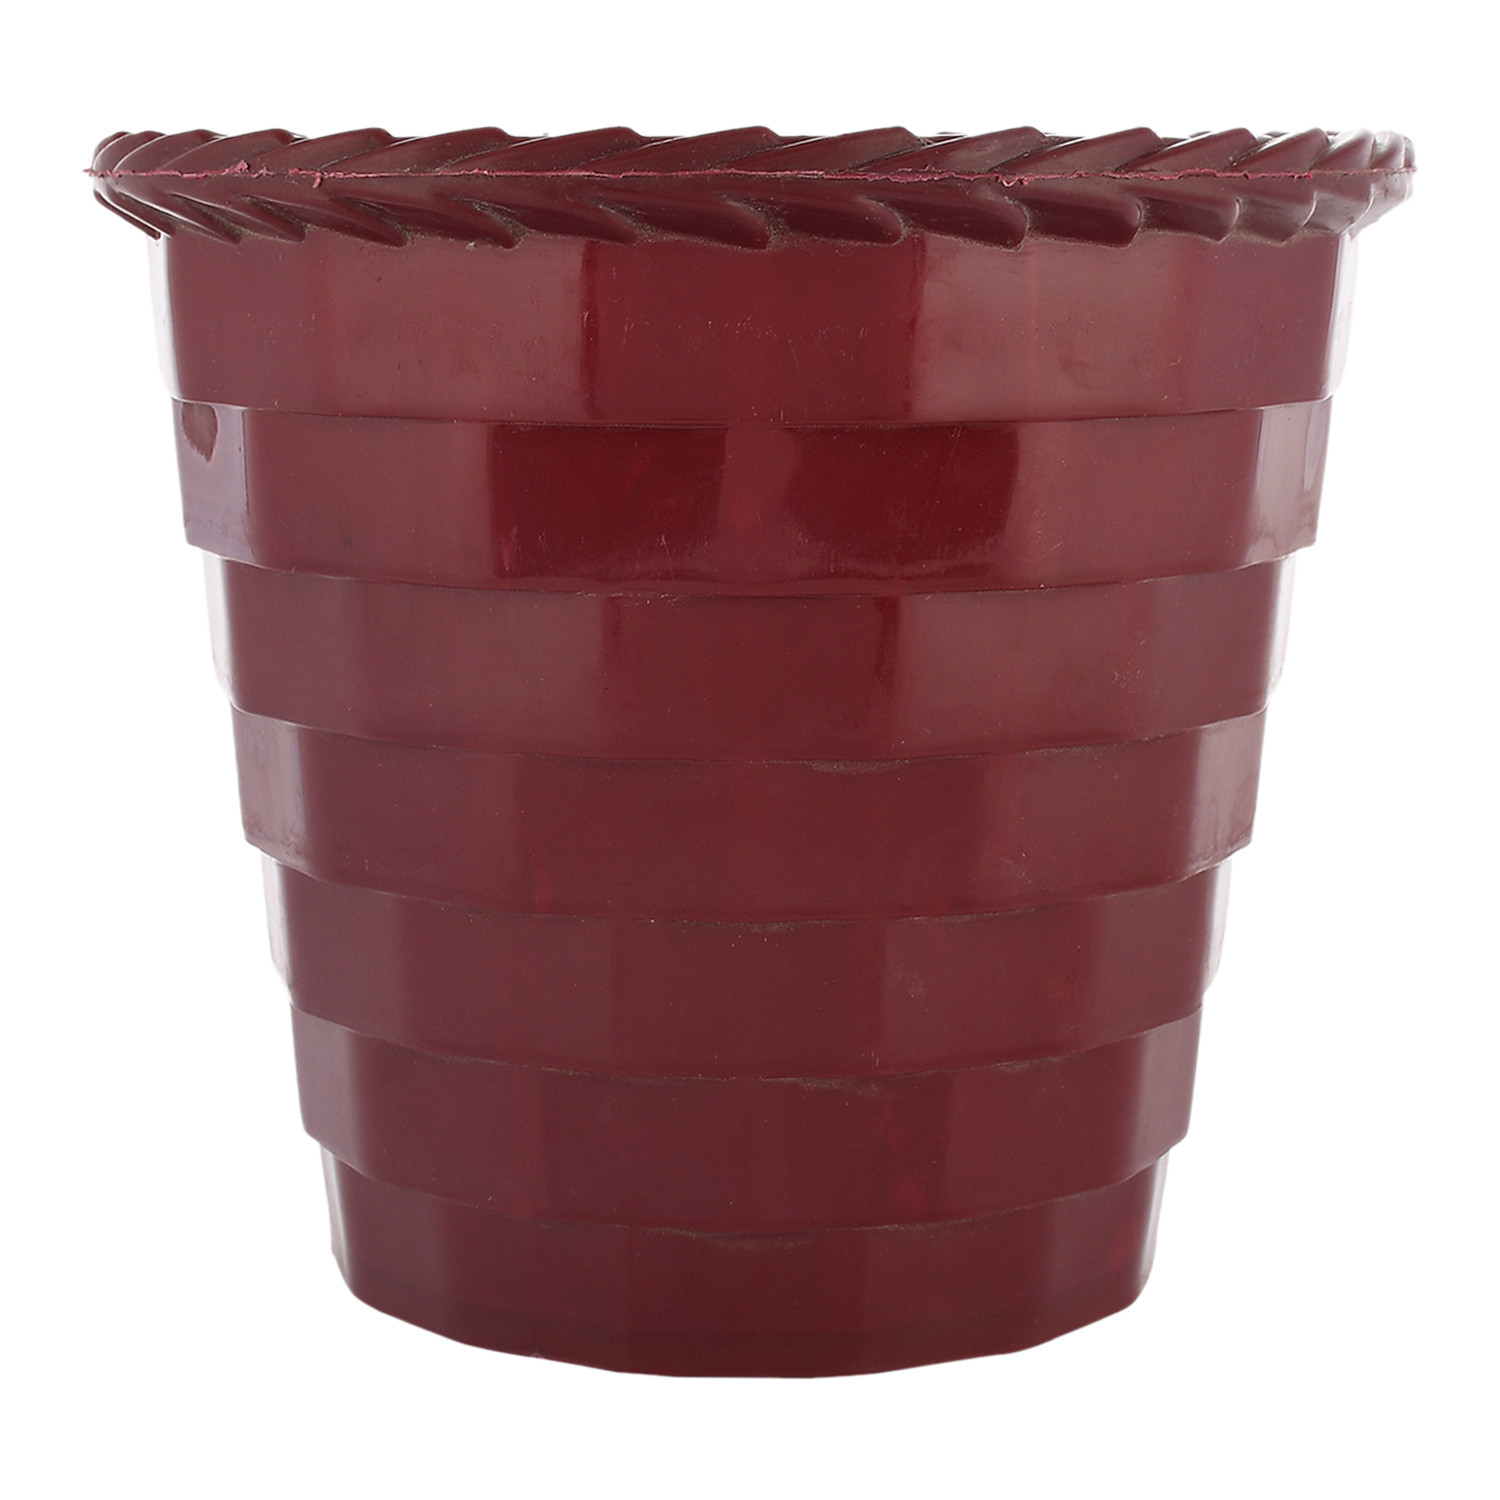 Kuber Industries Brick Flower Pot|Durable Plastic Flower Pots|Planters for Home Décor|Garden|Living Room|Balcony|8 Inch|Pack of 2 (Maroon & Grey)